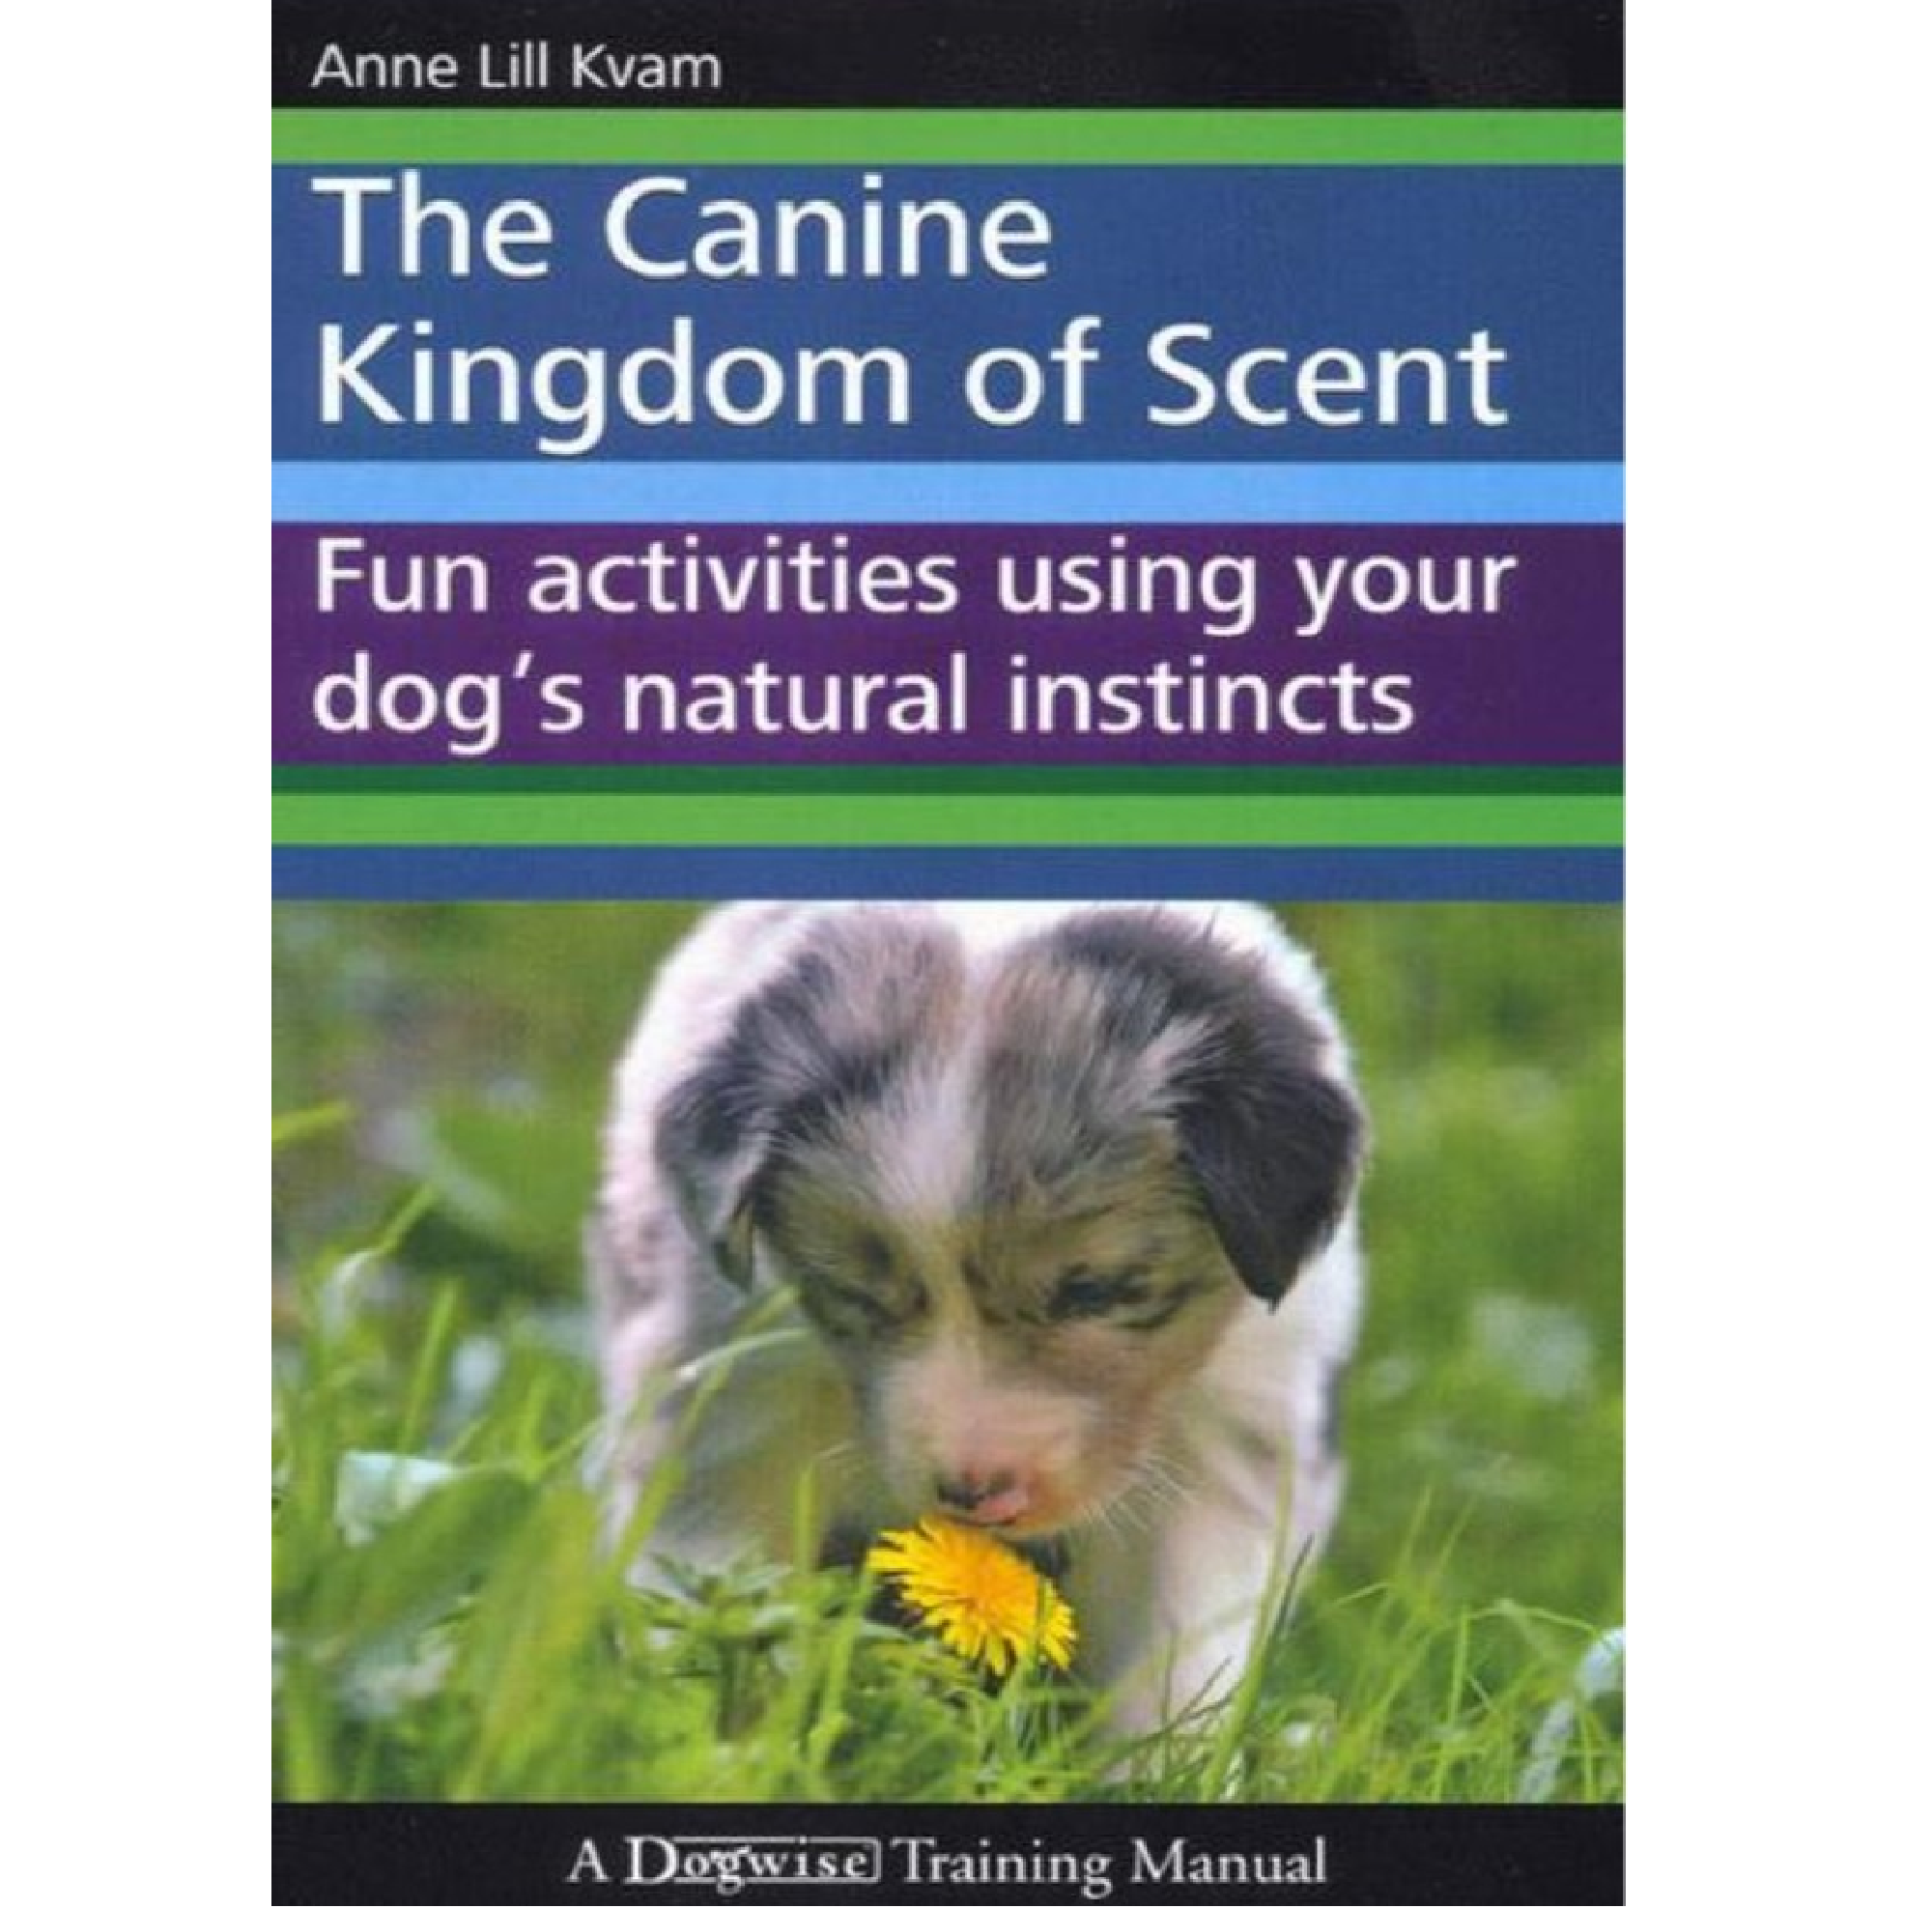 The Canine Kingdom Of Scent - Fun Activities Using Your Dog's Natural Instincts